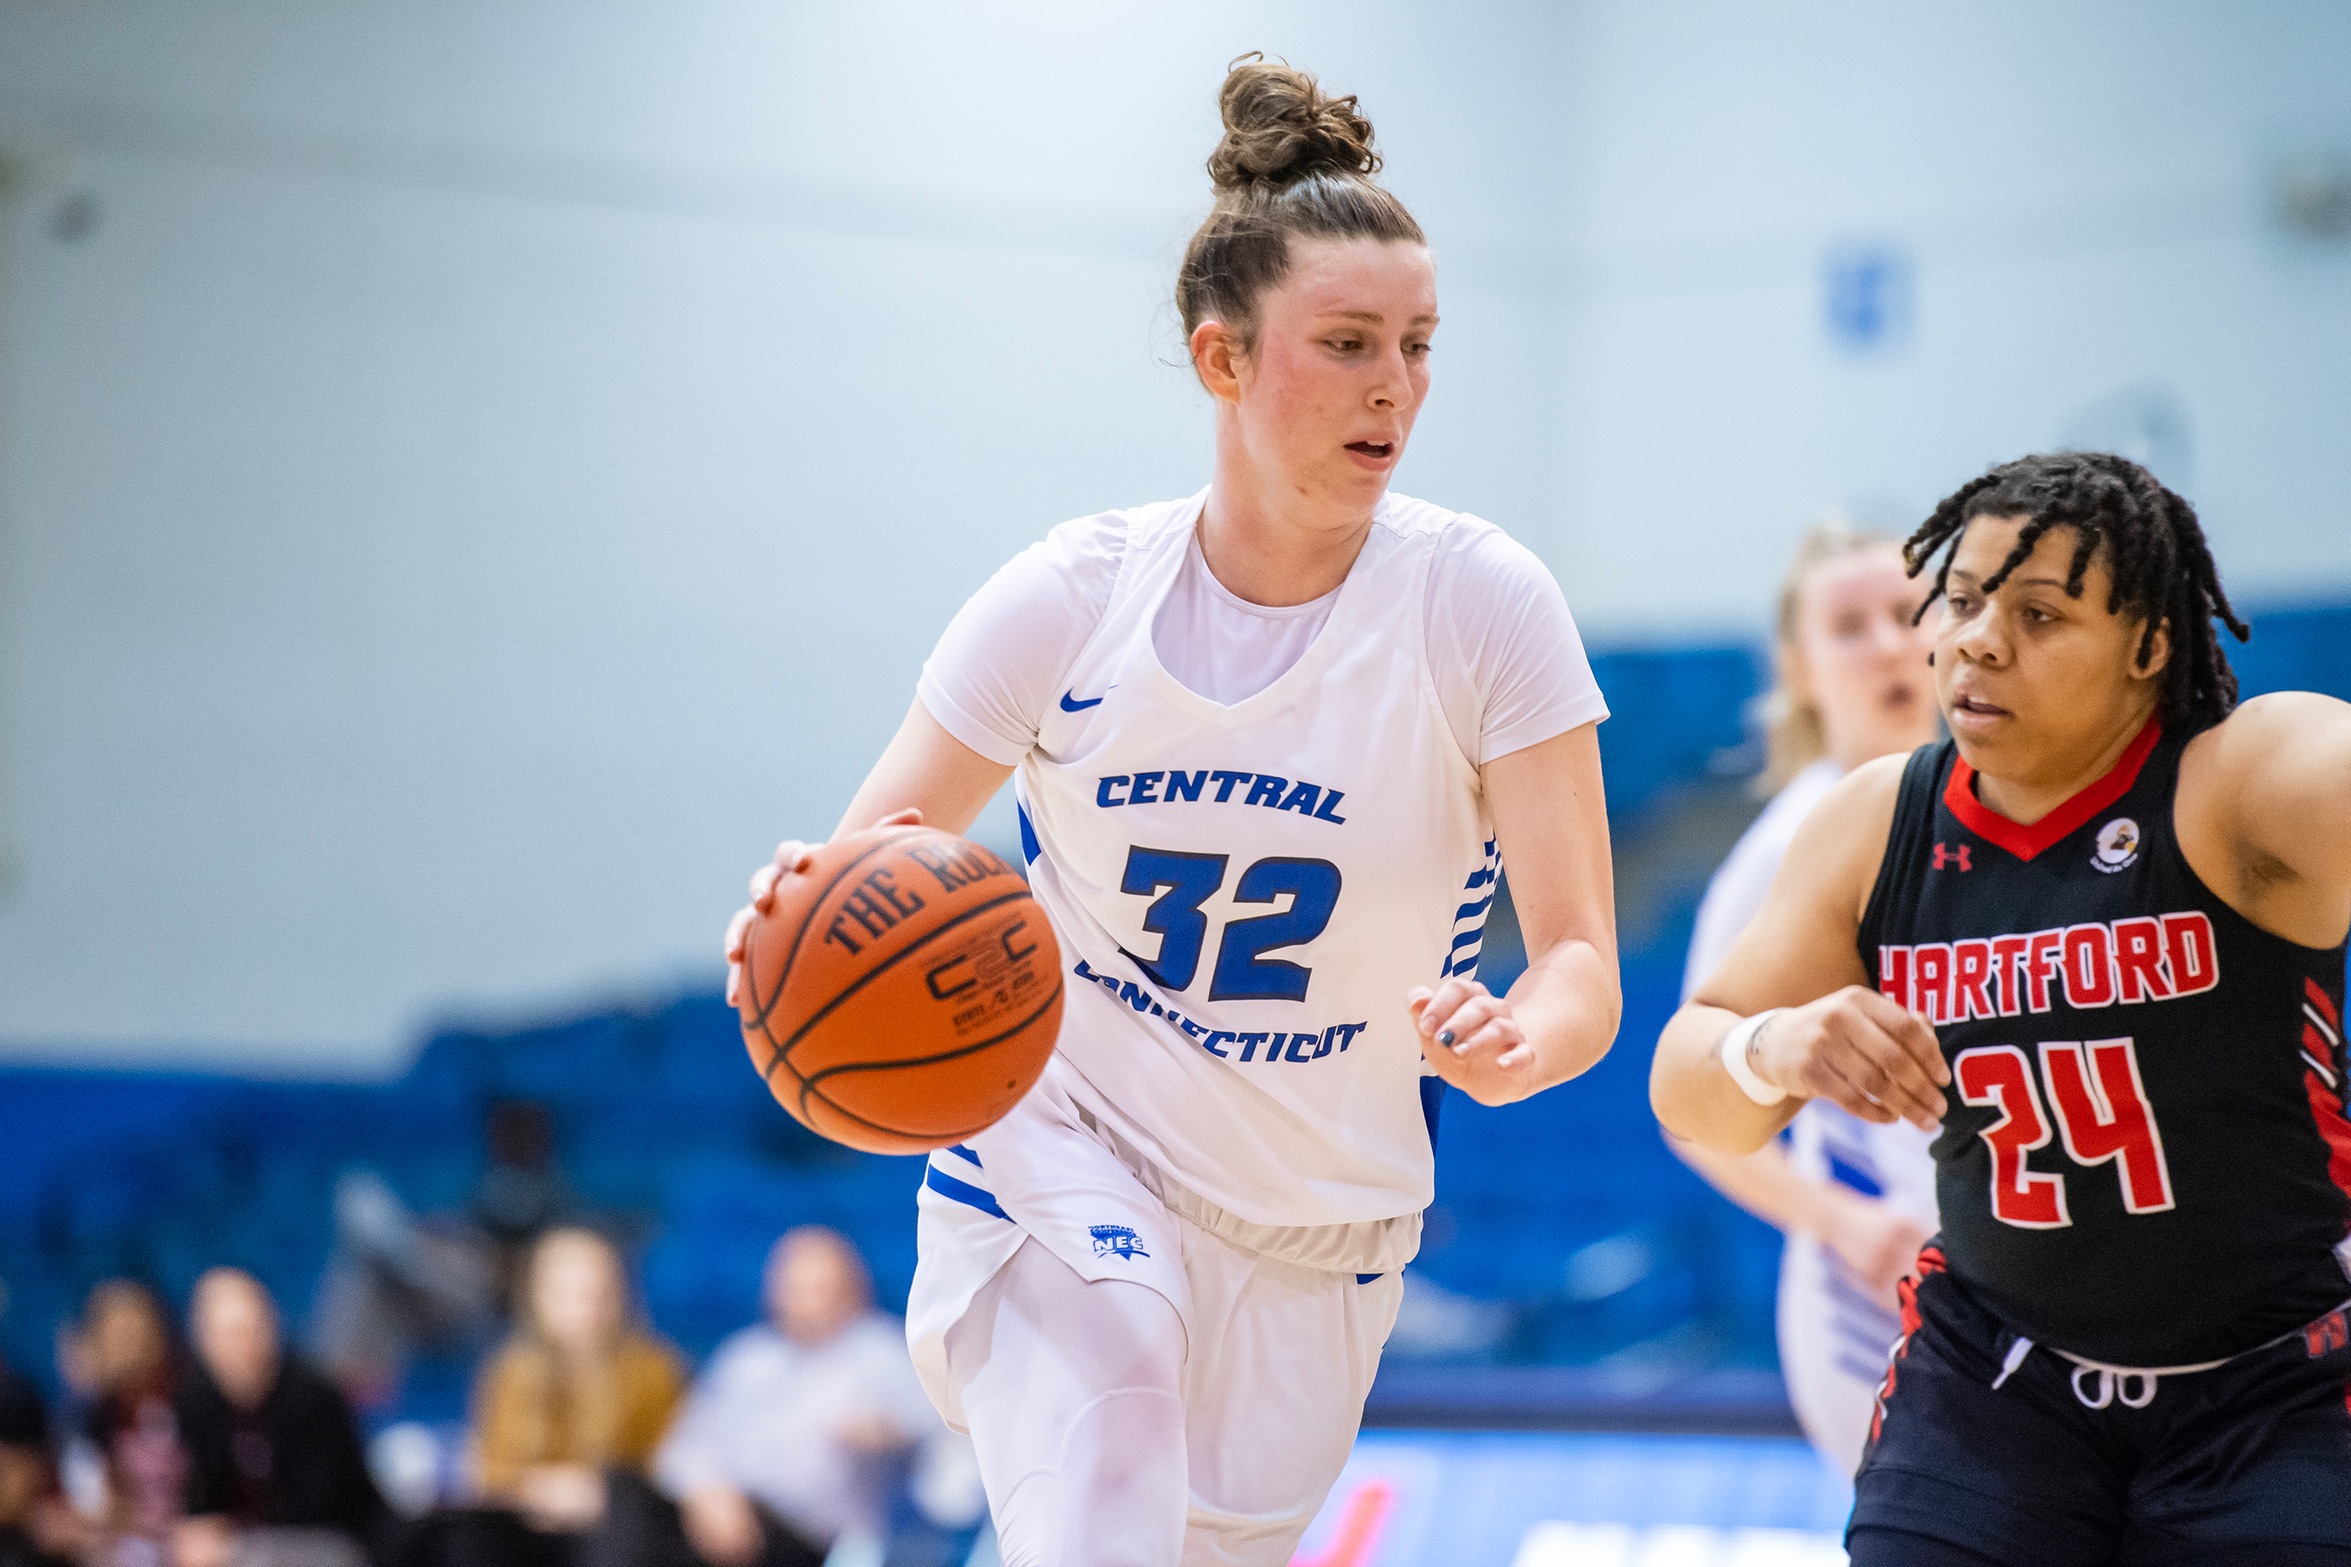 Meghan Kenefick had 11 of her 14 points in the second half on Wednesday, helping the Blue Devils to a 72-55 win over Hartford. (Photo: Steve McLaughlin)